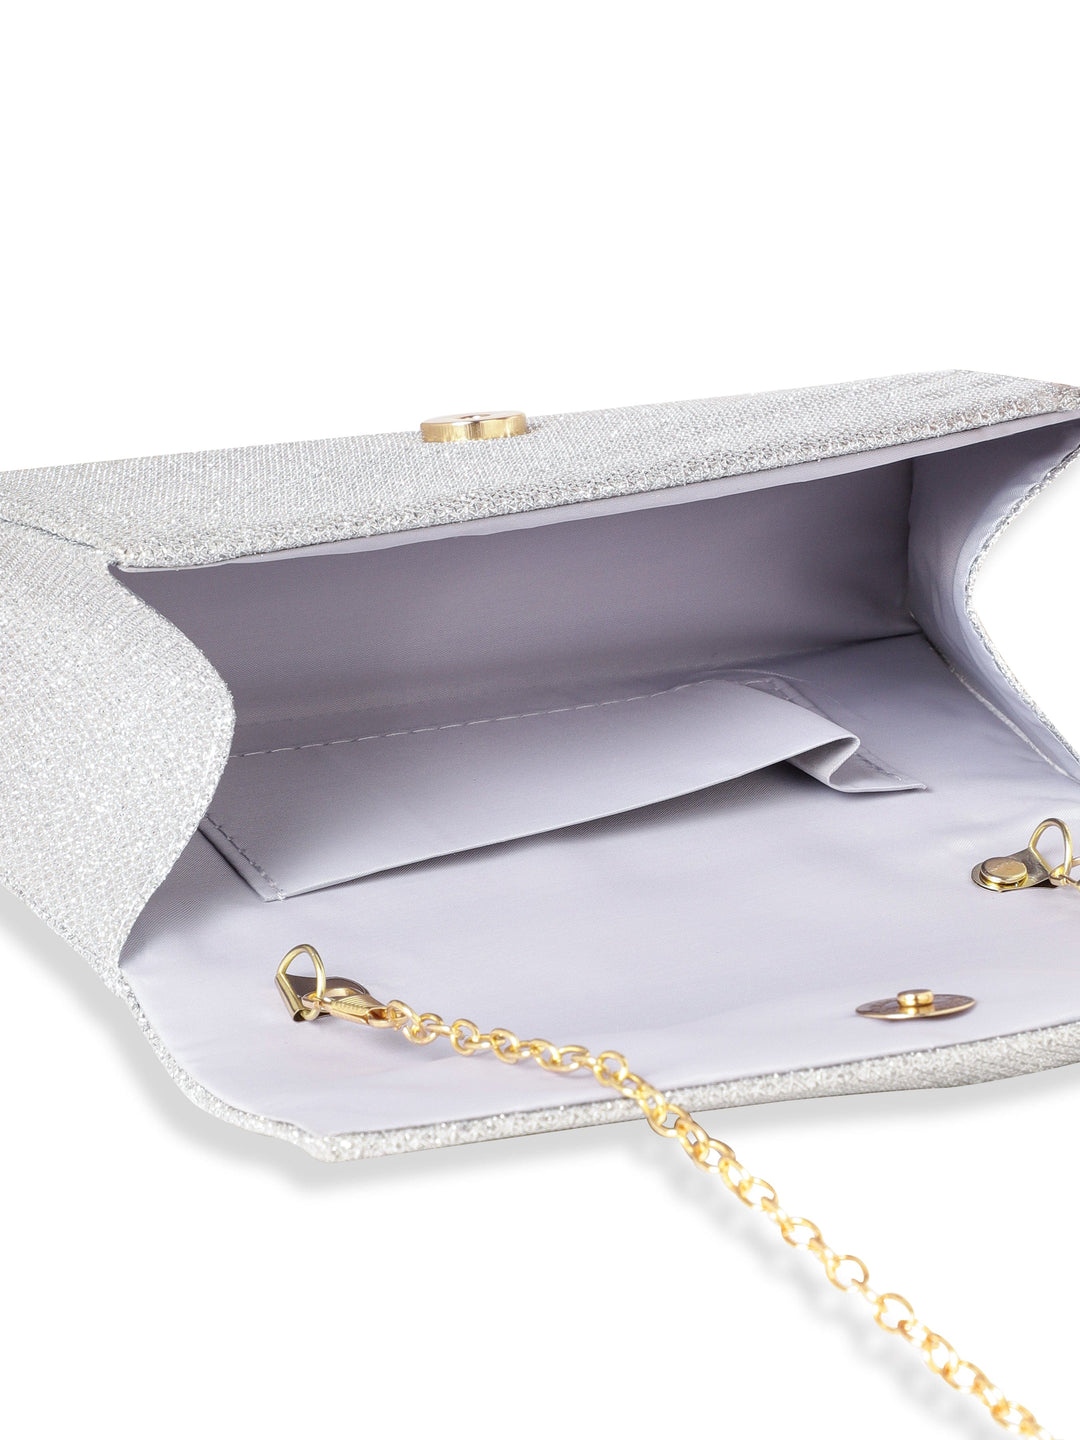 Rubans Timeless Radiance Handcrafted Silver Shimmery Clutch Bag Handbag, Wallet Accessories & Clutche